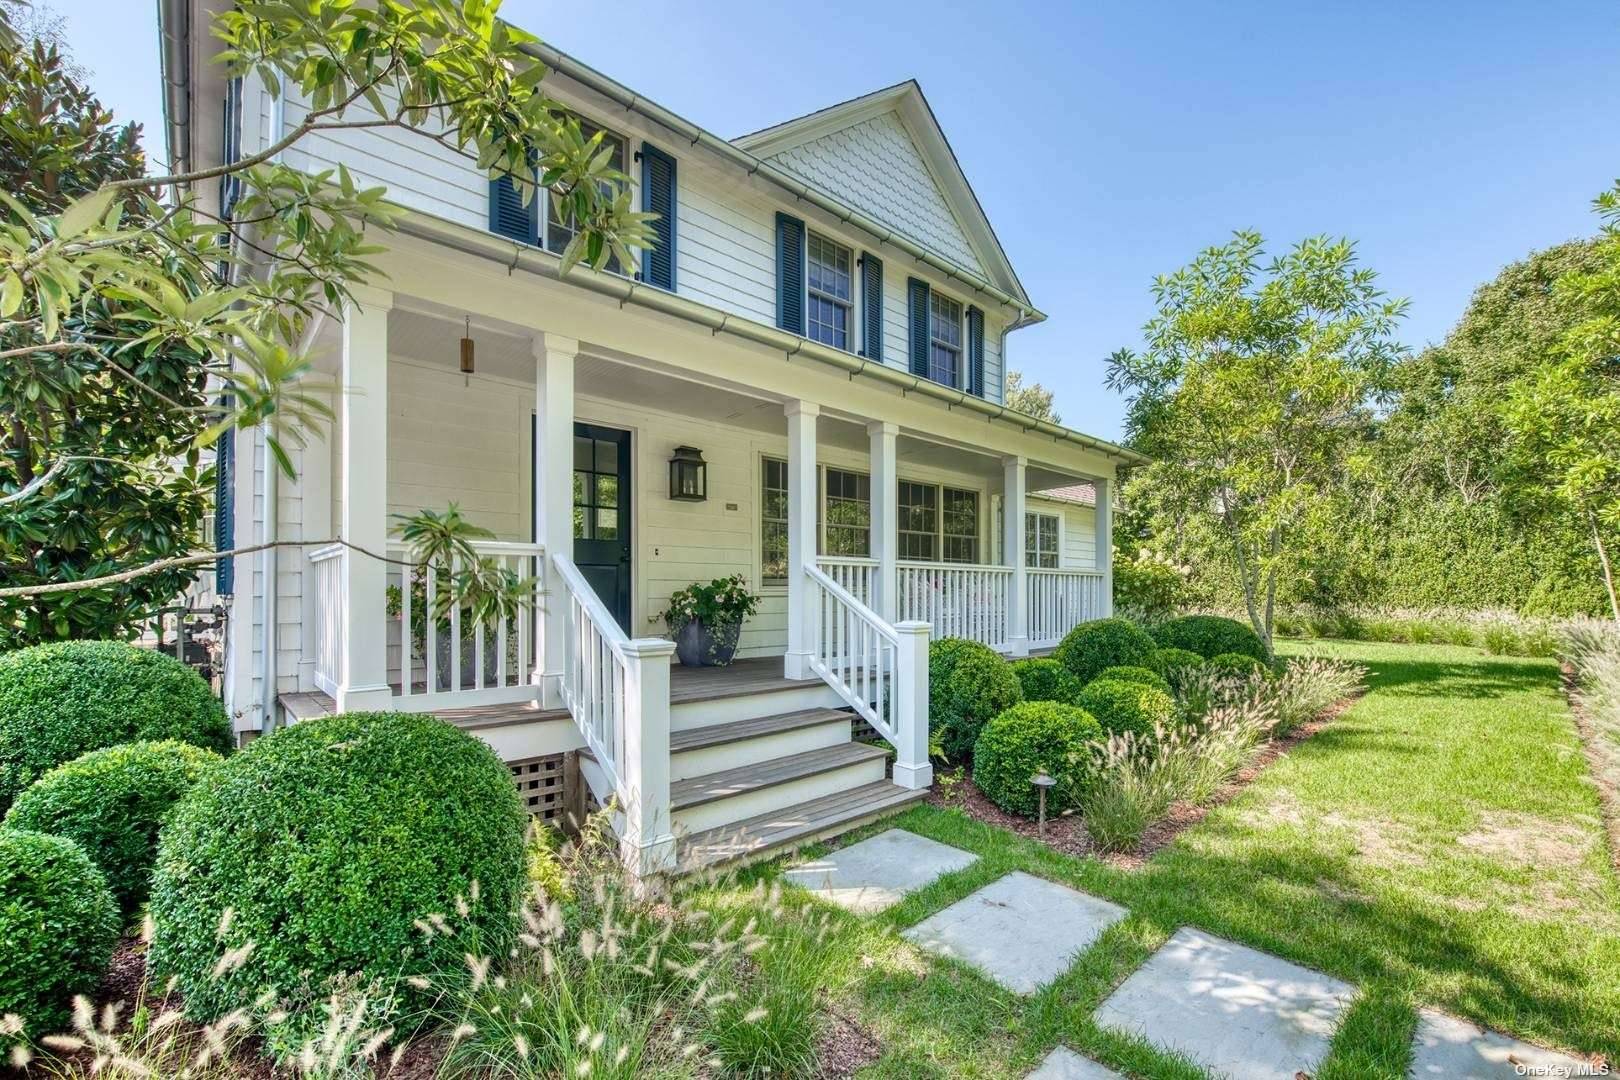 East hampton Village Charm beautifully renovated home situated close to village shops, fine restaurants and beaches.